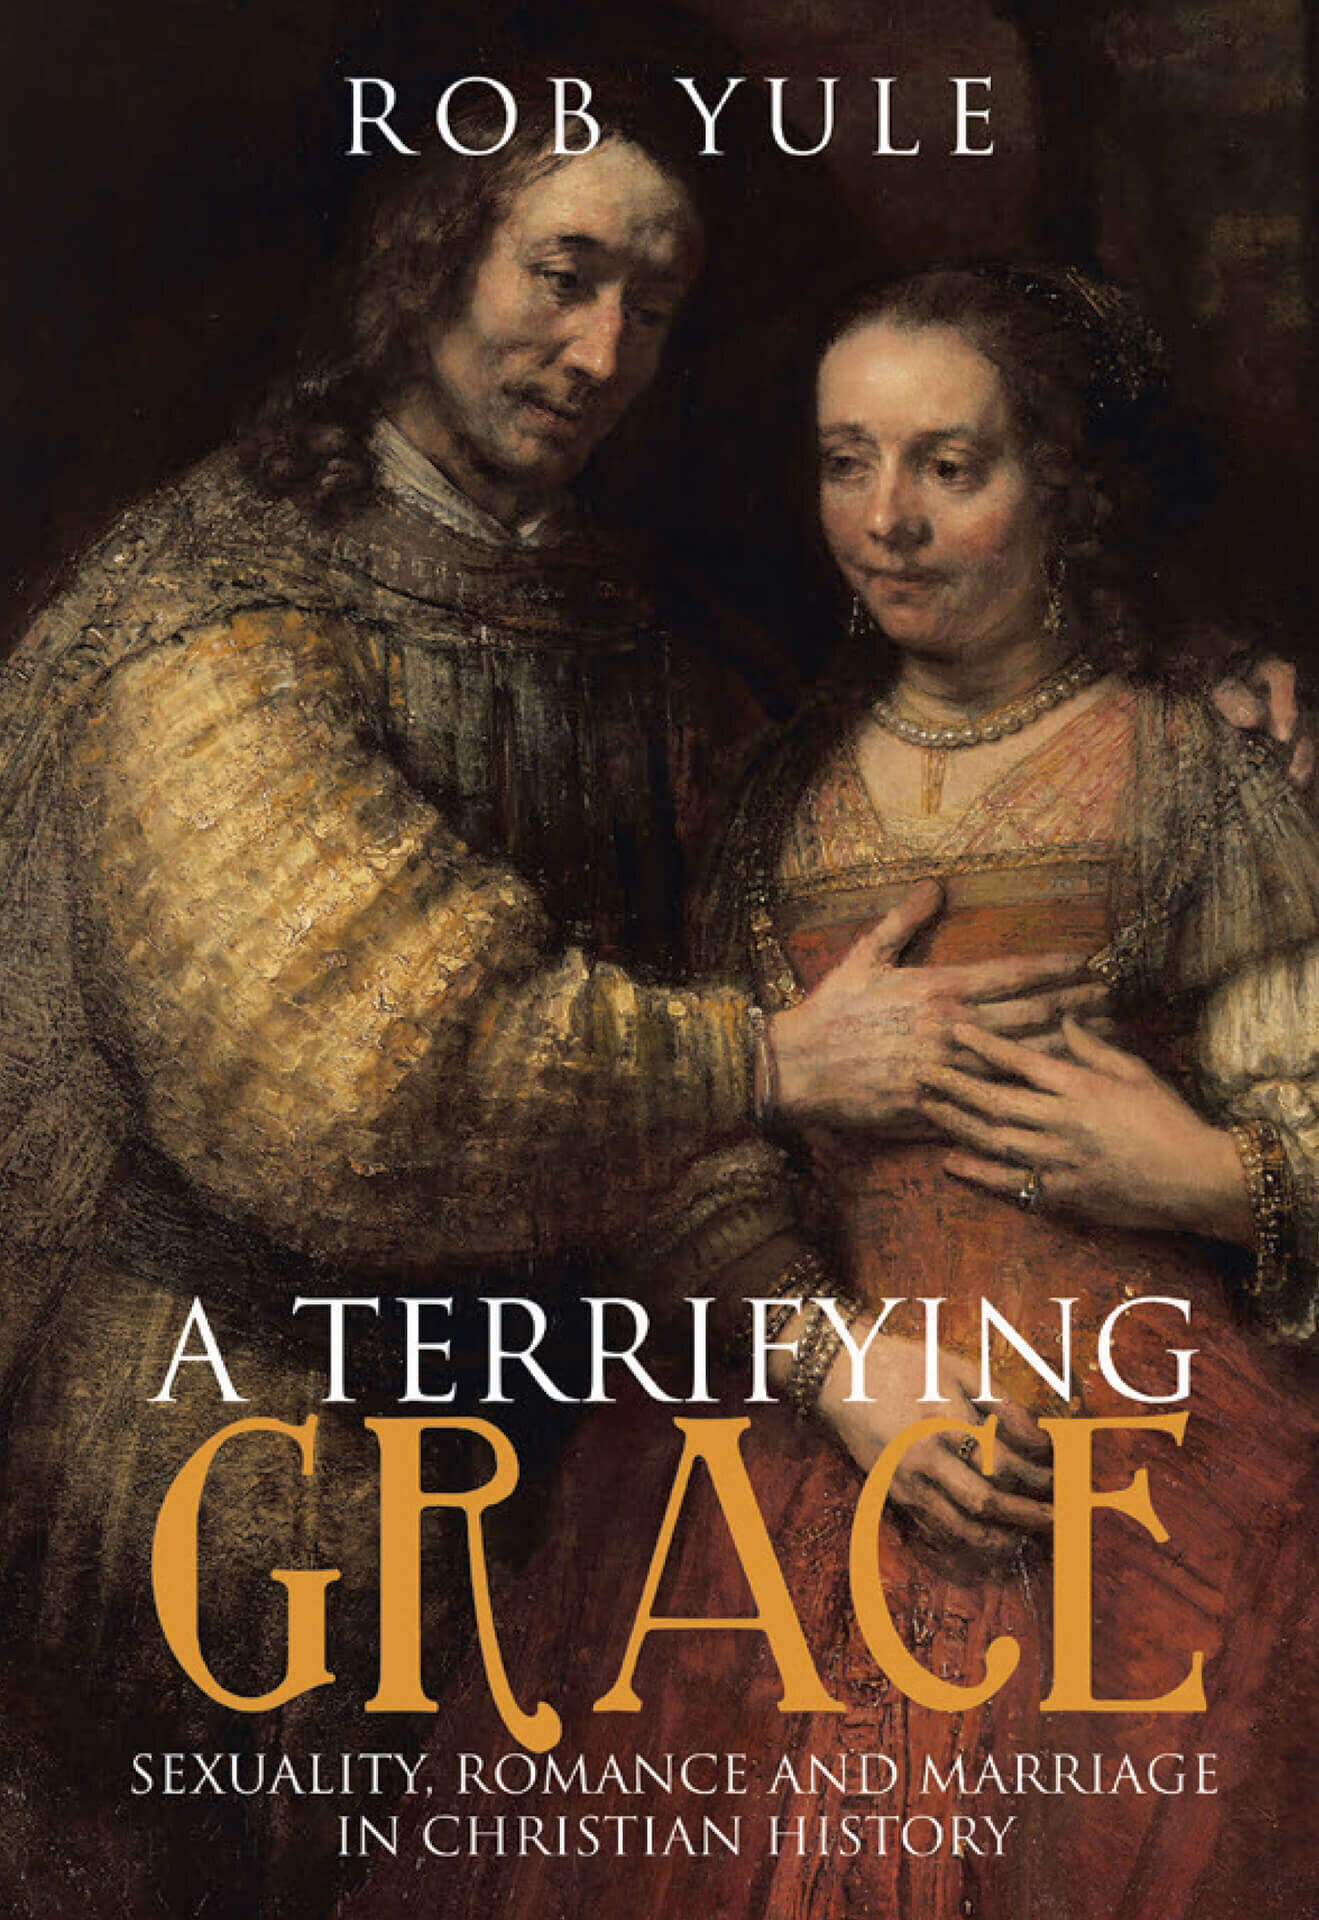 A-Terrifying-Grace-Rob-Yule-Front-Cover-Westbow-Press-Wild-Side-Publishing-Christian-Books-New-Zealand-NZ.jpg